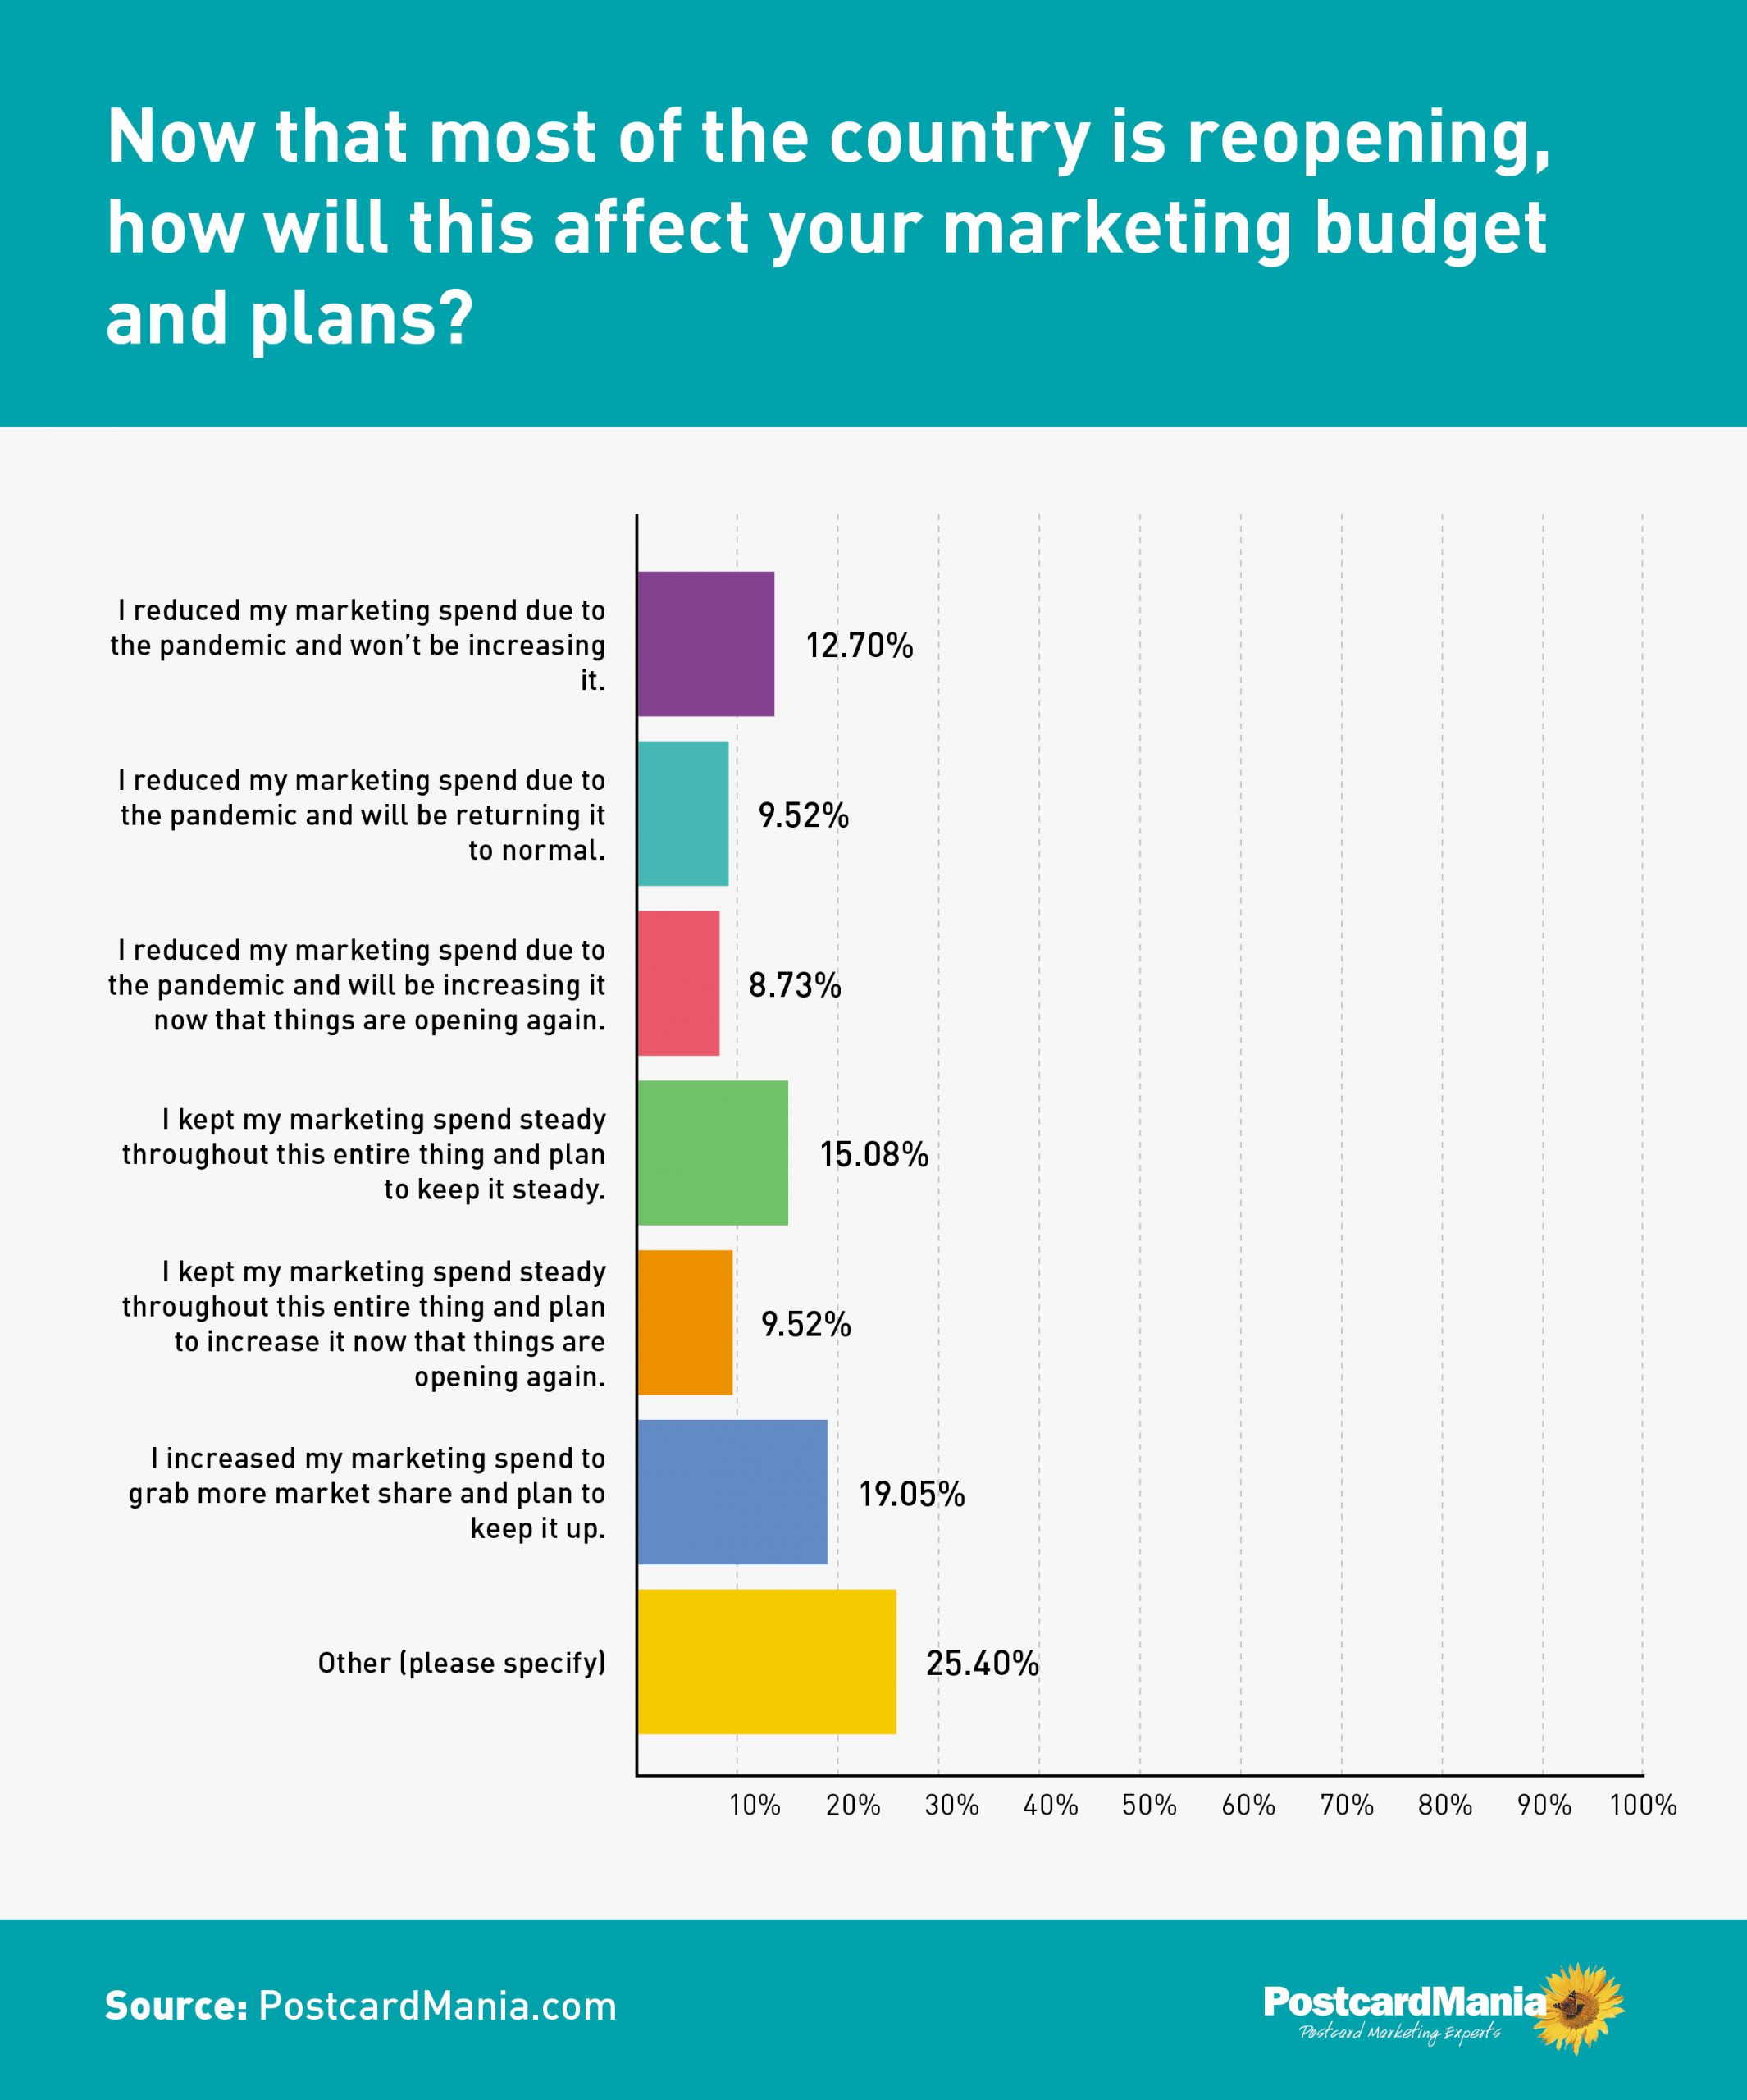 COVID-19 Survey - Bow that most of the country is reopening, how will this affect your marketing budget and plans?